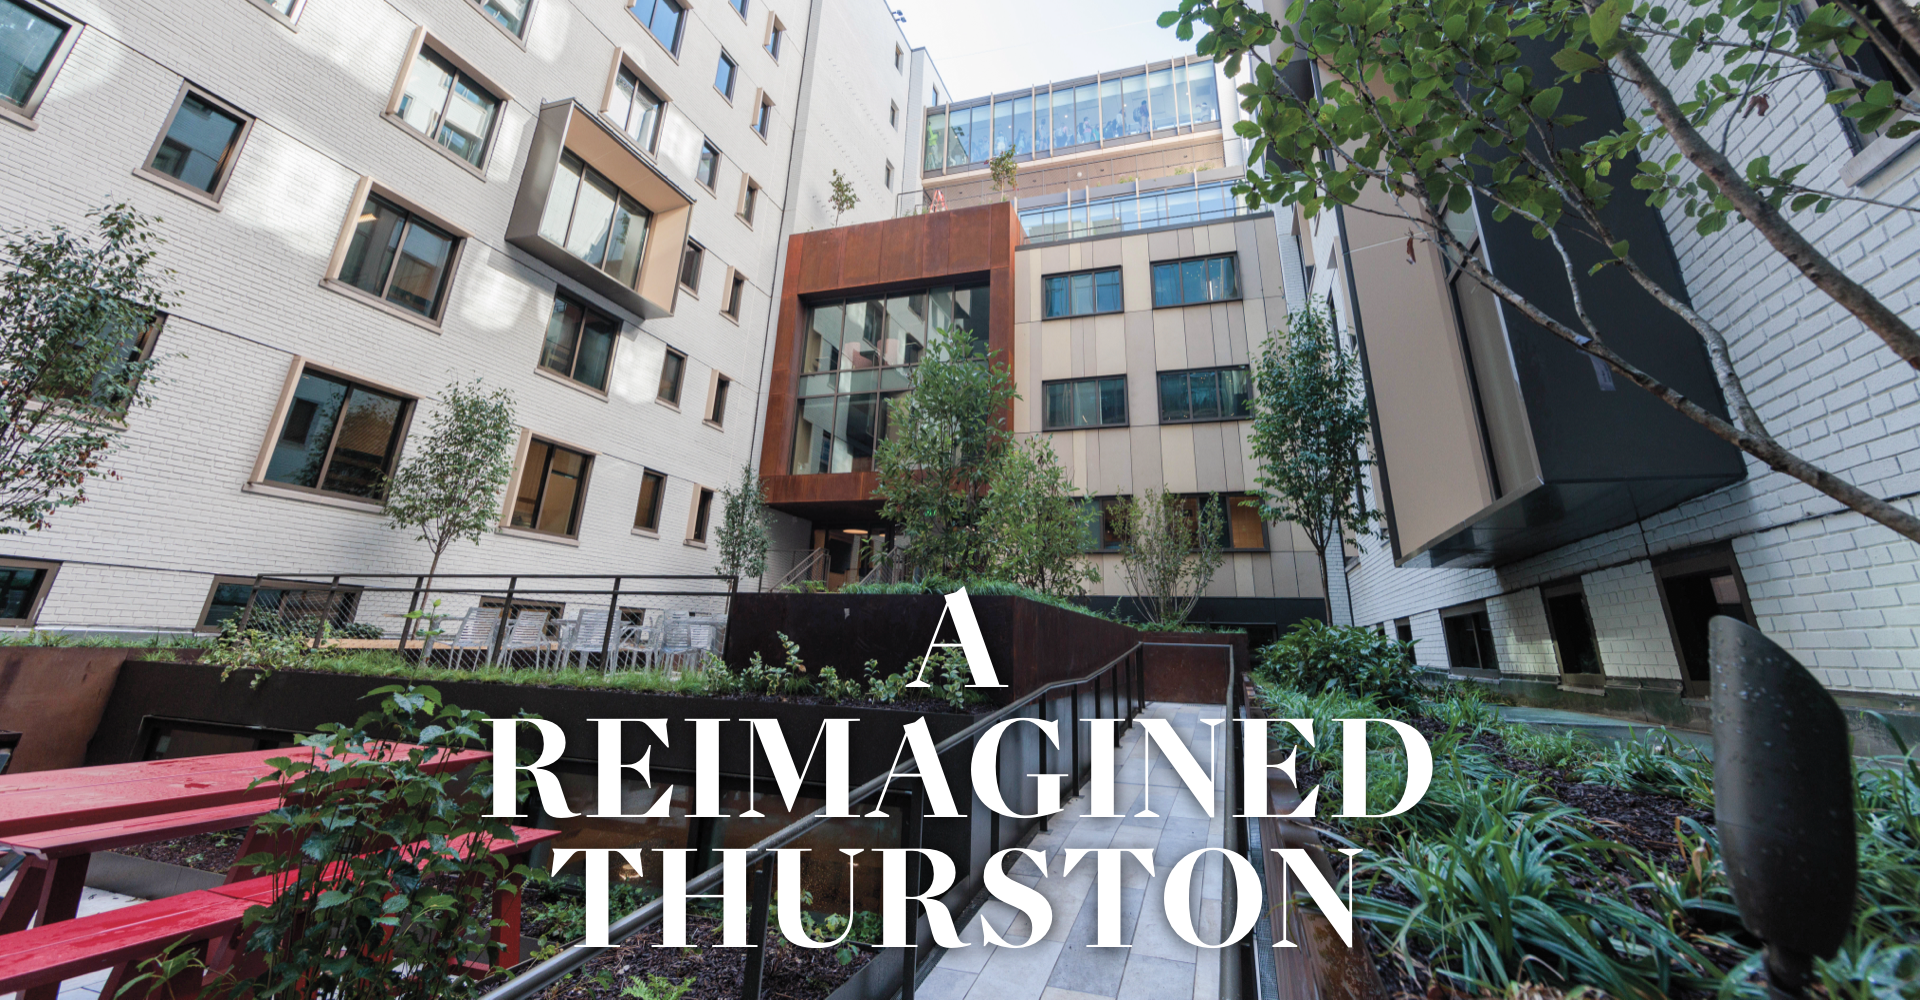 A reimagined thurston